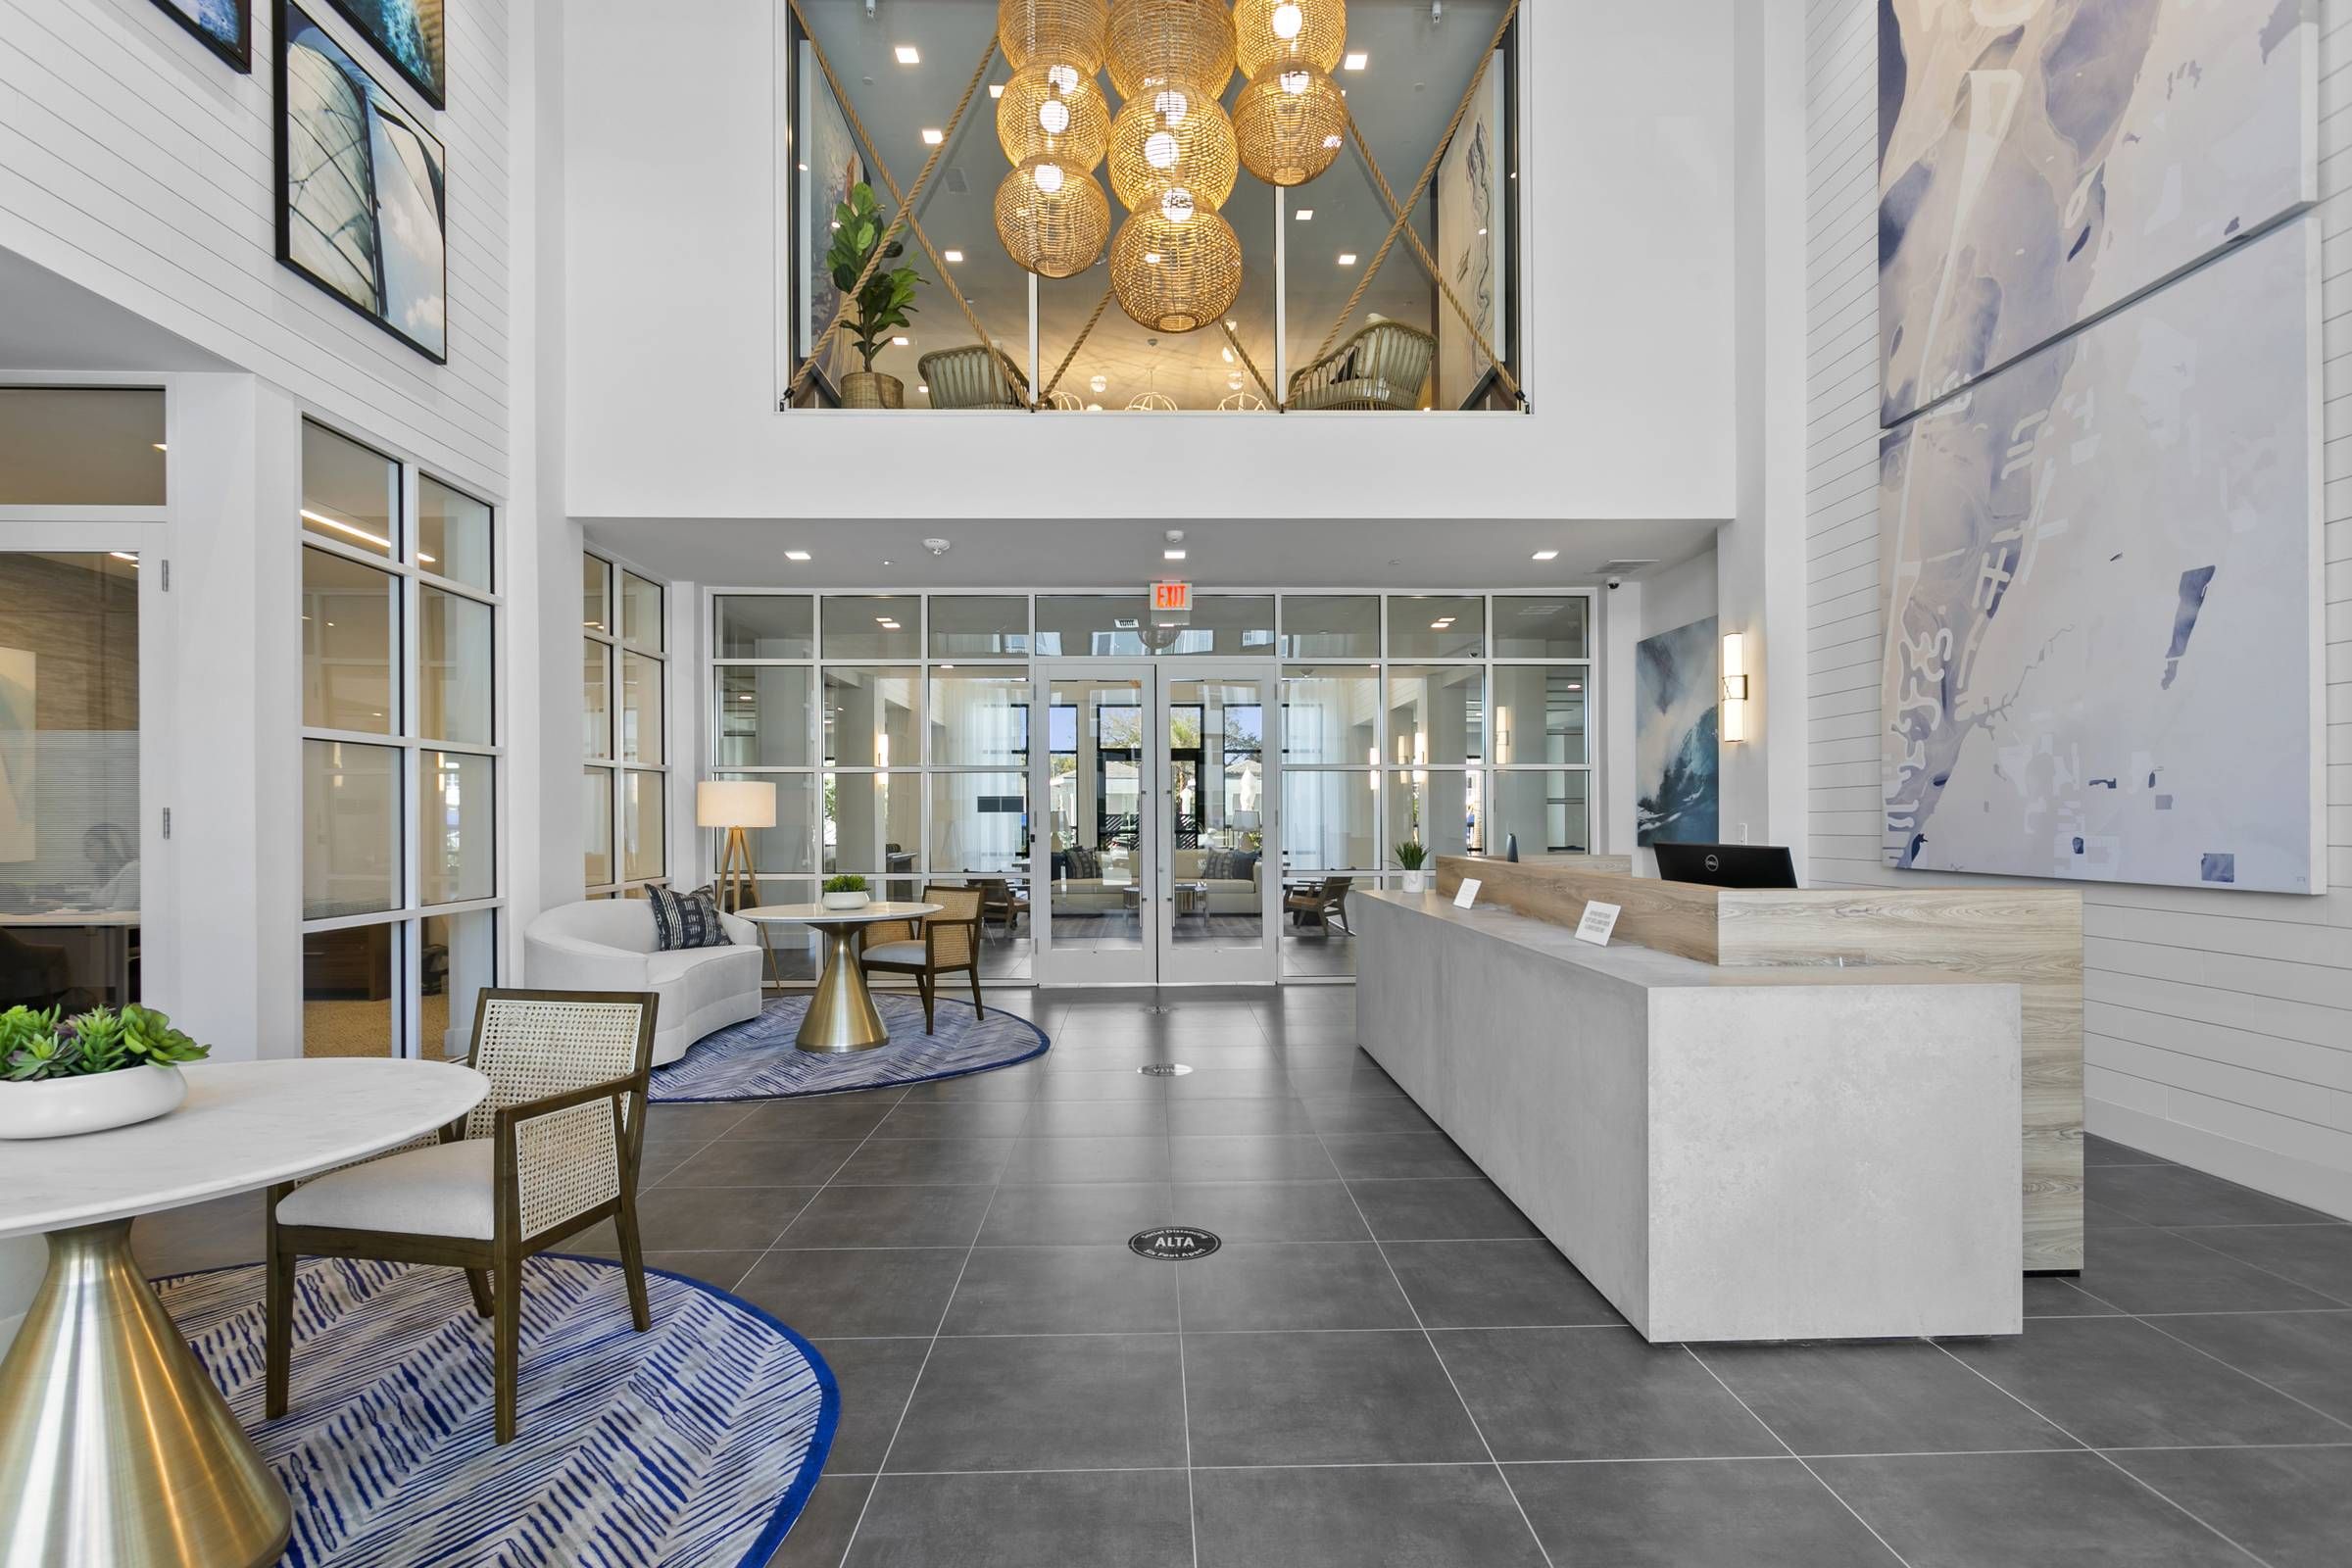 The grand entrance lobby of Alta Belleair with high ceilings, chic seating arrangements, and striking lighting, embodying a welcoming atmosphere.